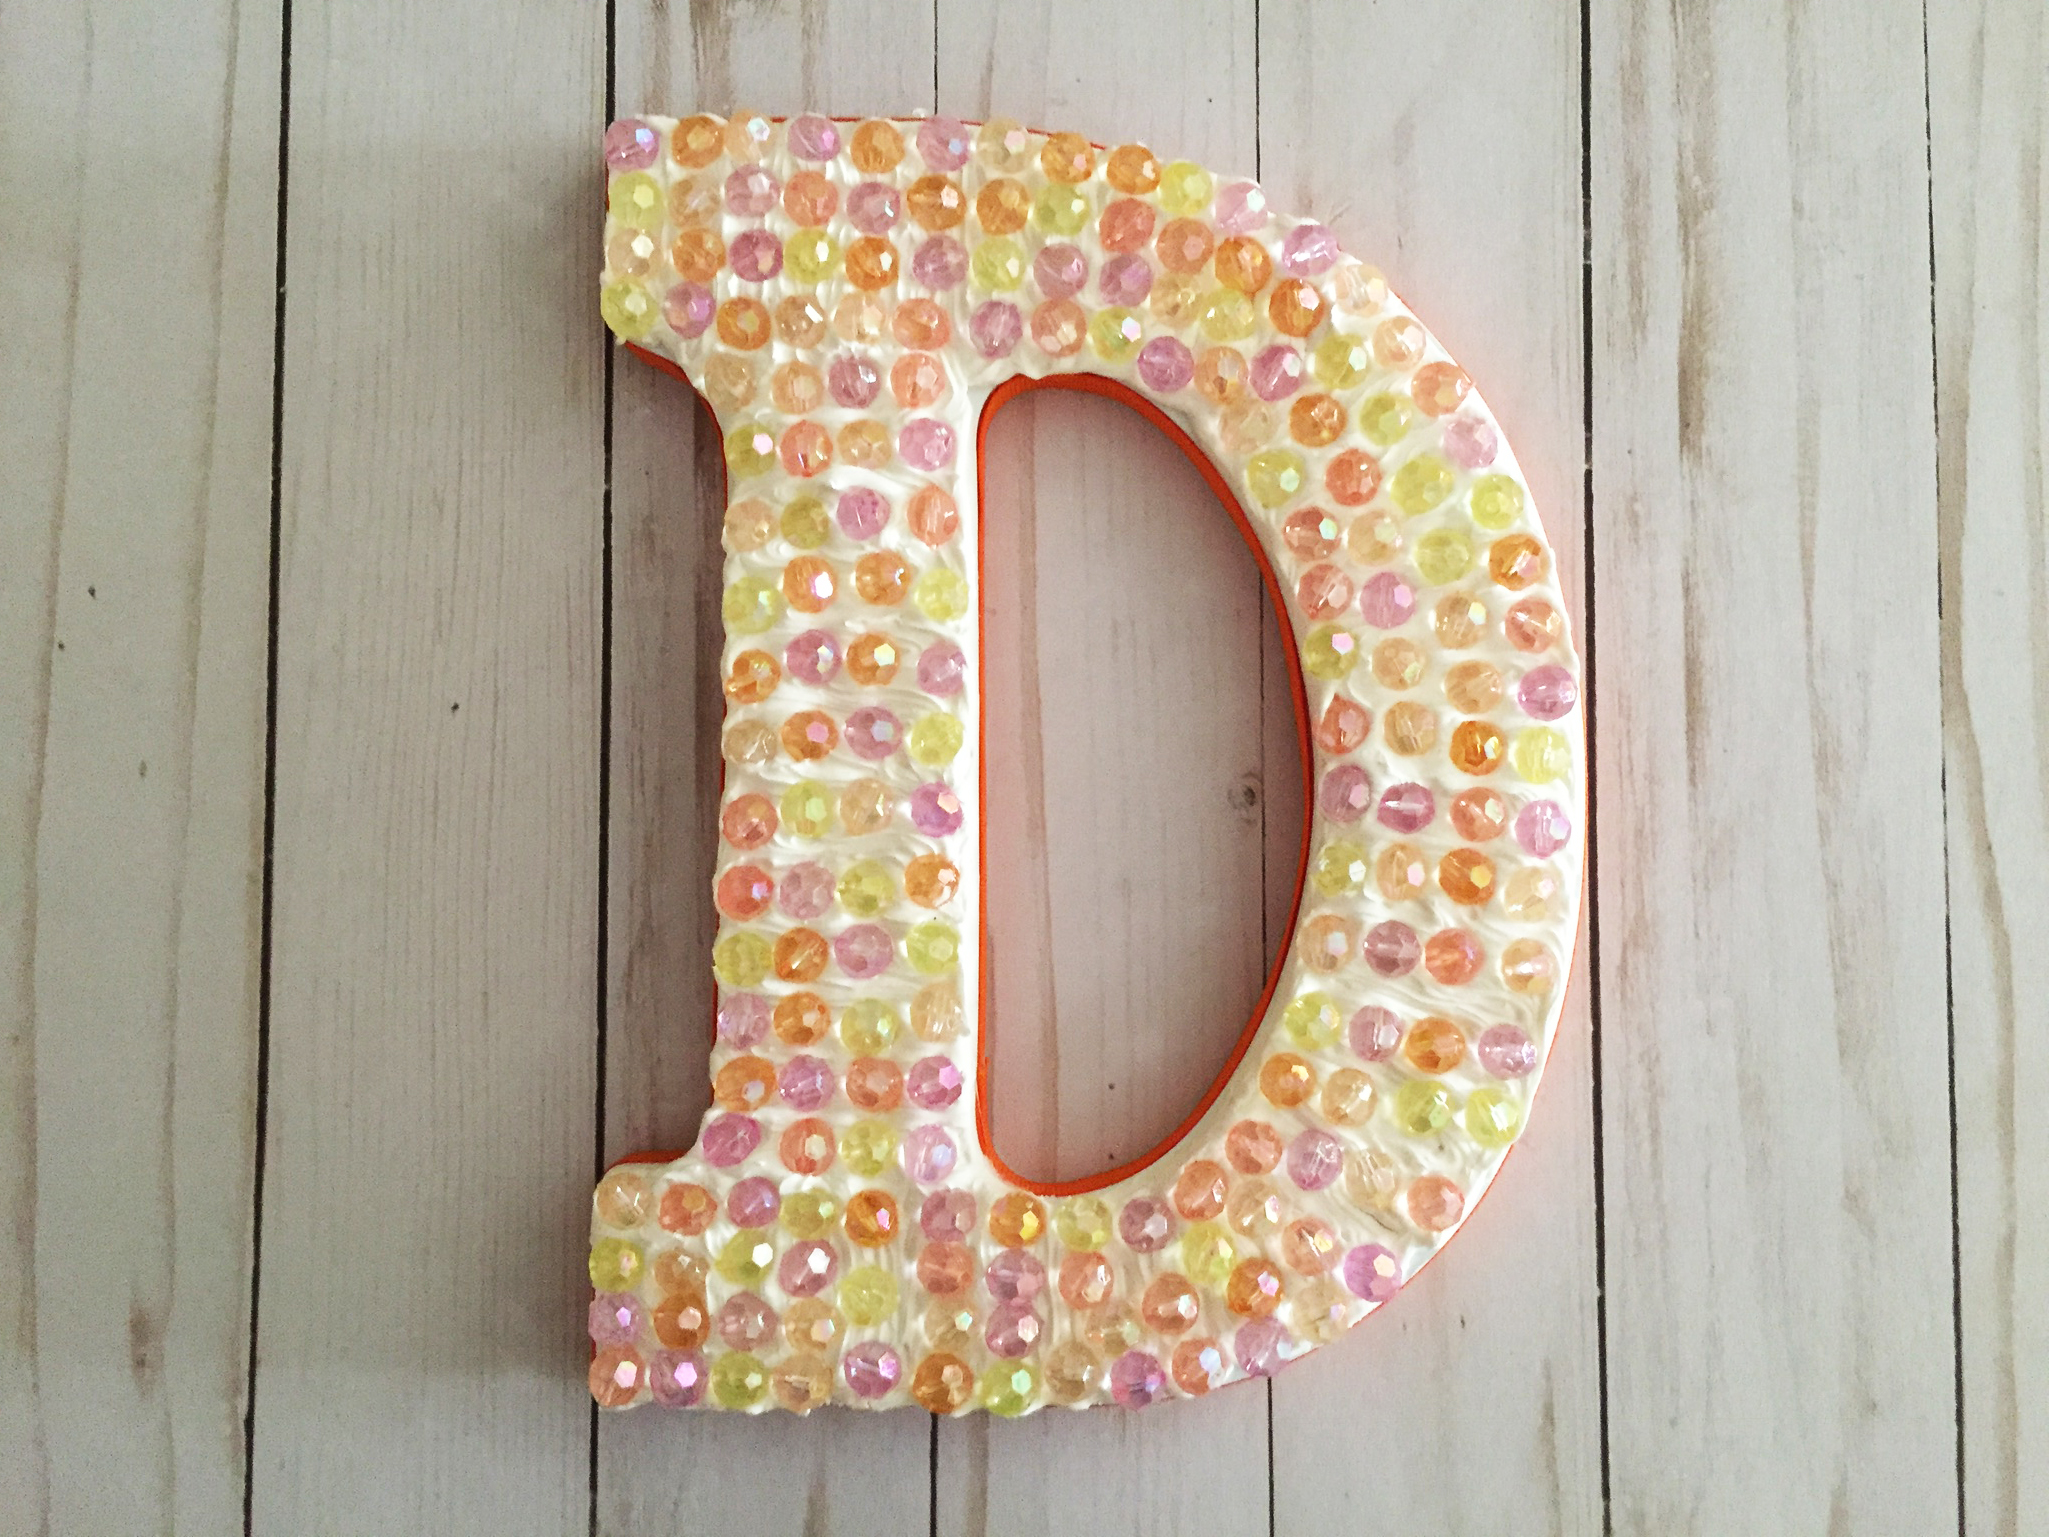 How to Modpodge Letters - Sweet Southern Oaks